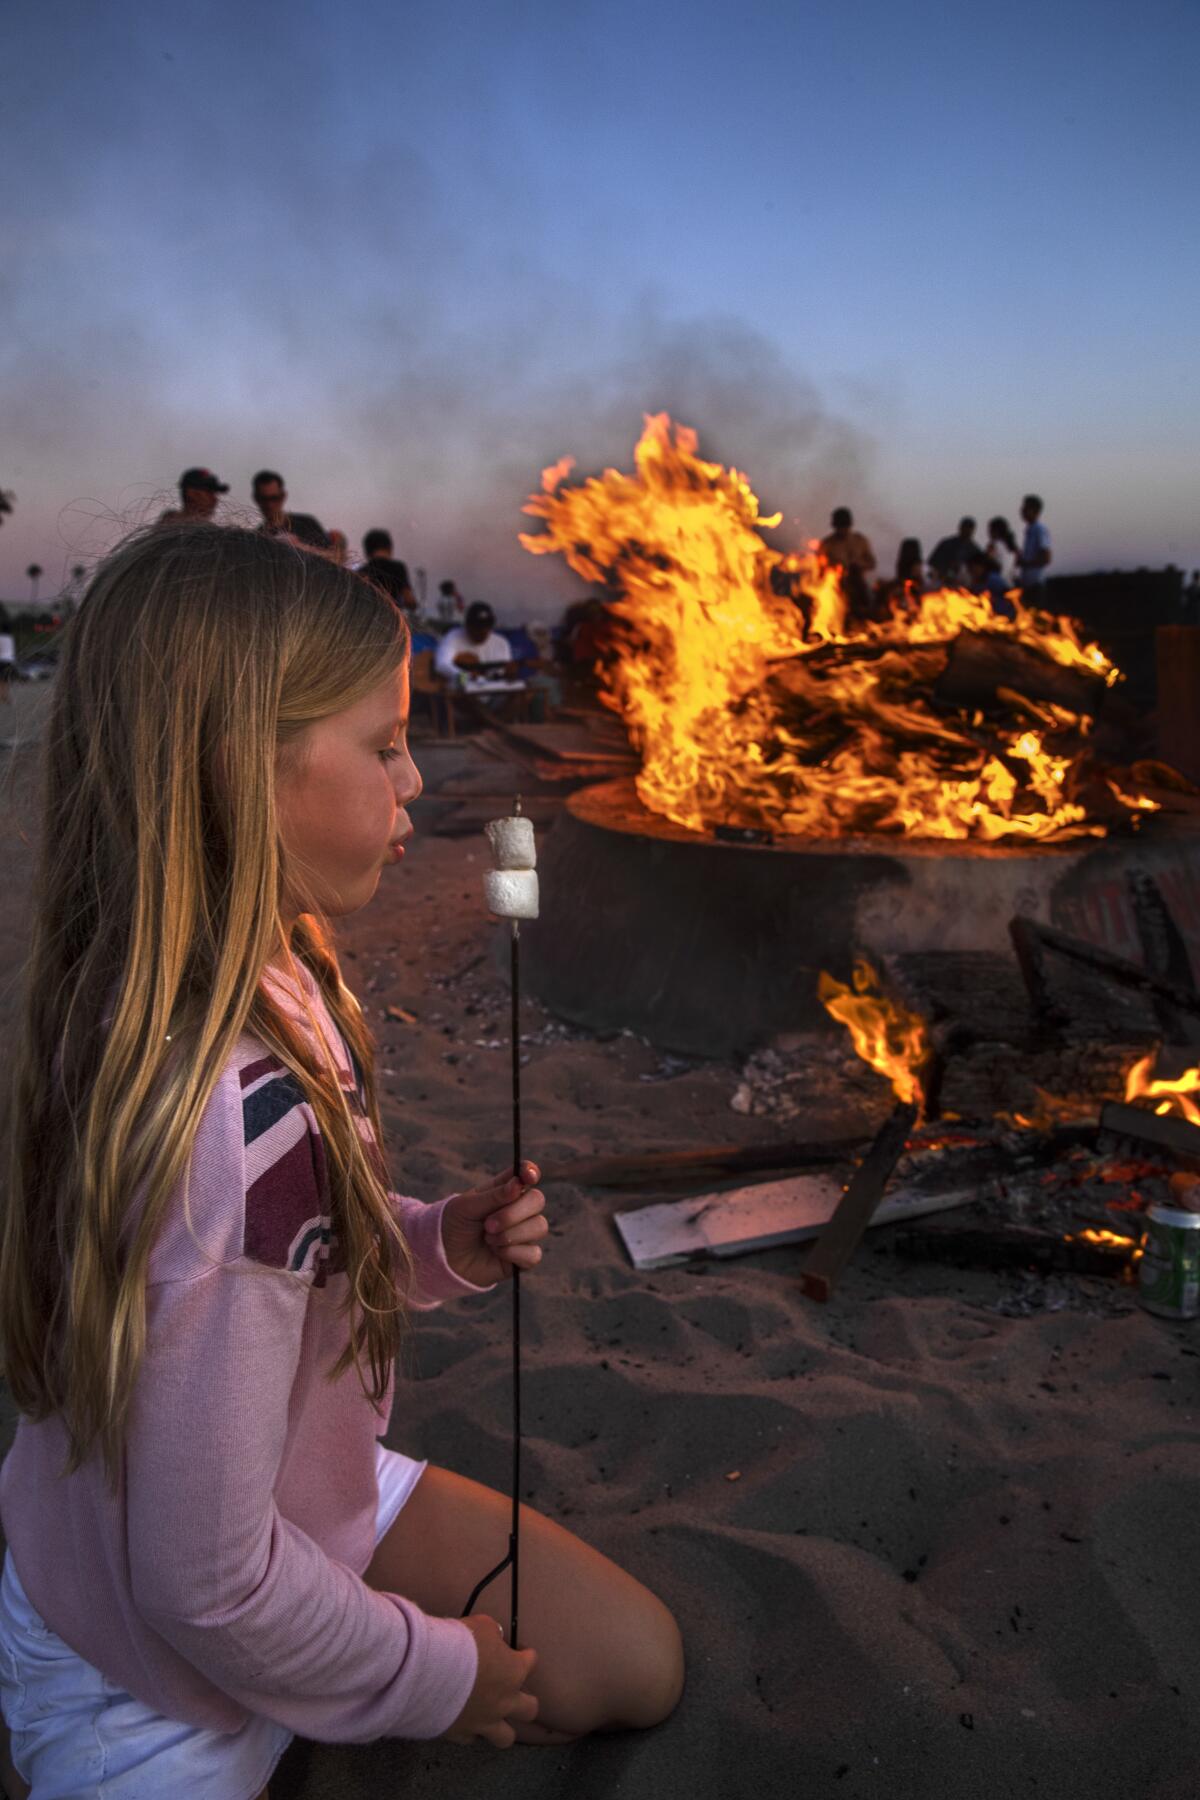 Kate Remillard, 8, of Manhattan Beach, cools her marshmallows at a bonfire at Dockweiler. The beach trends young, but all ages are represented.